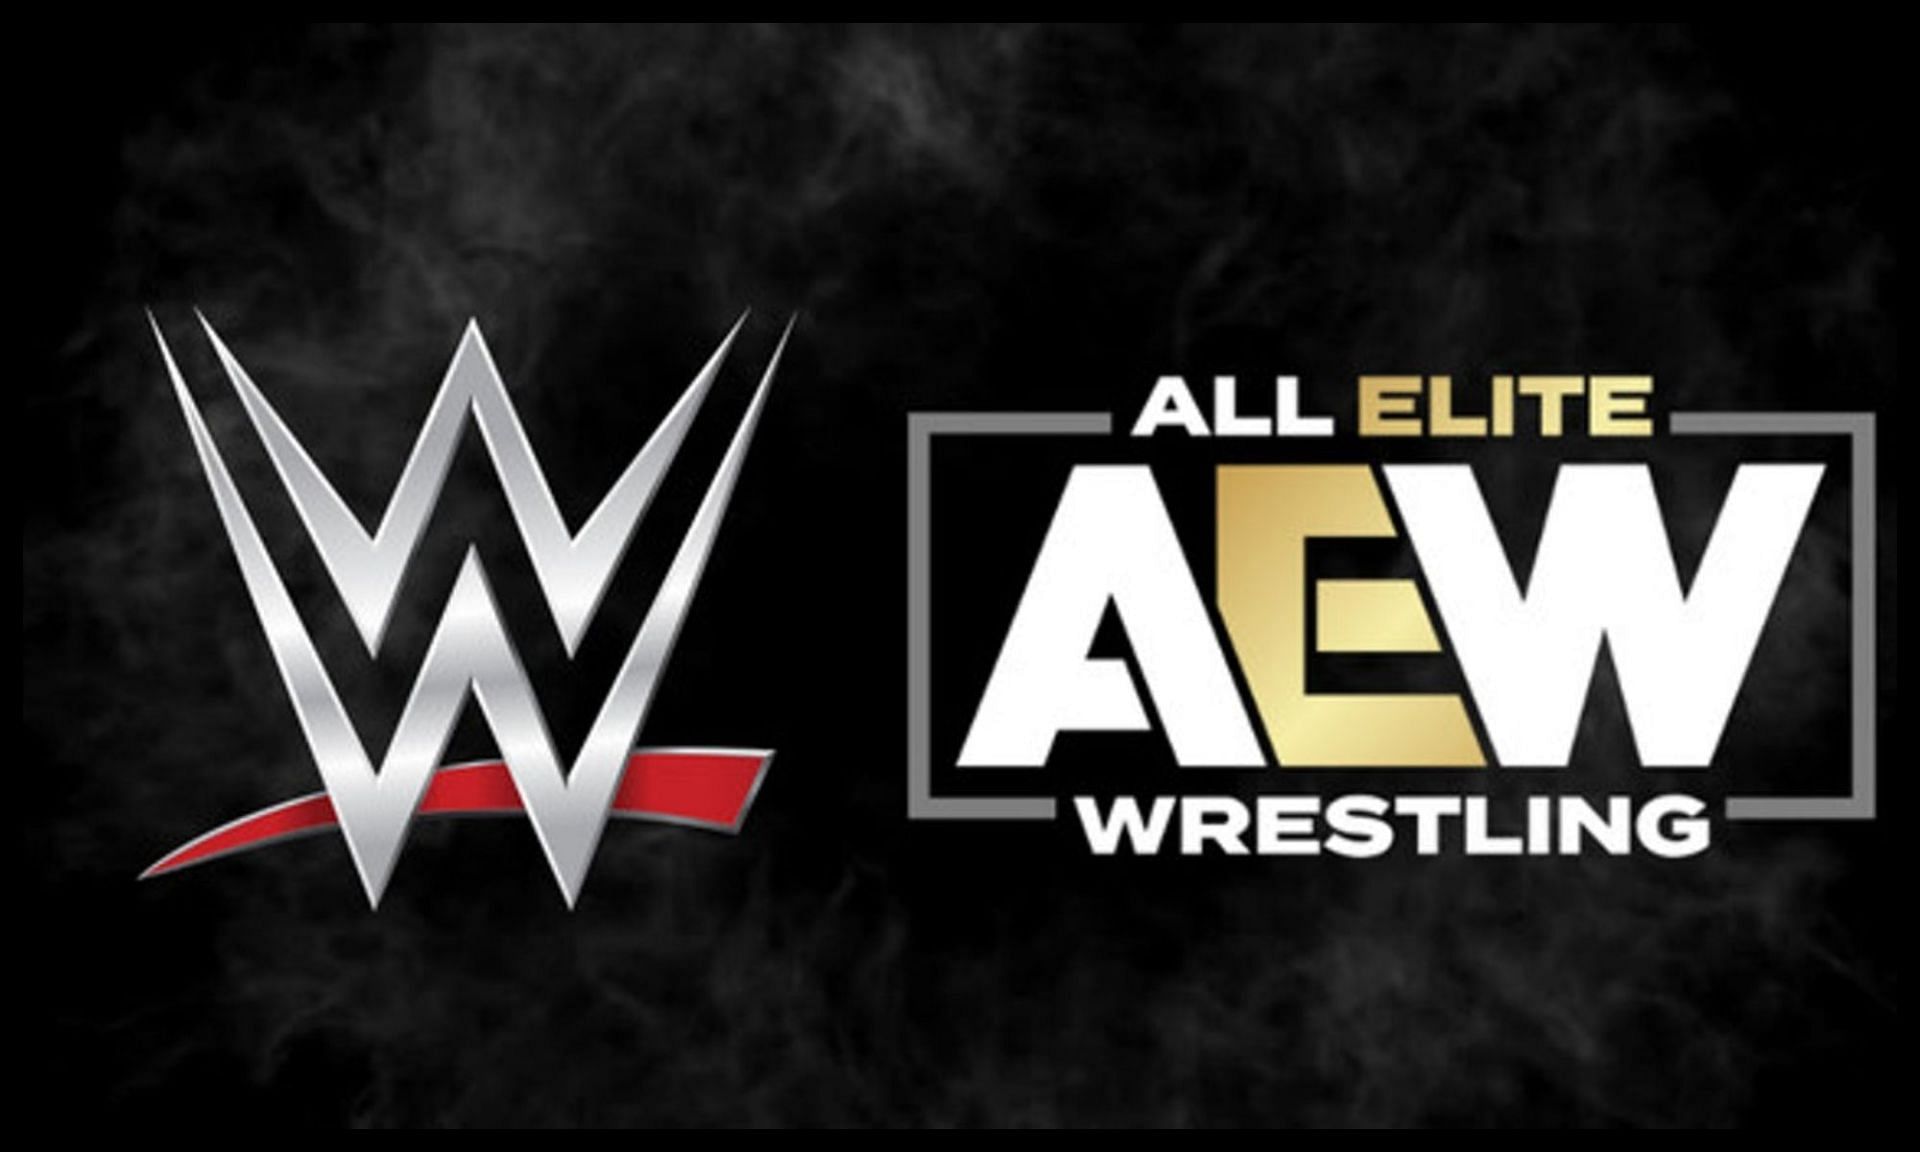 AEW and NJPW recently wrapped up a highly successful Forbidden Door PPV